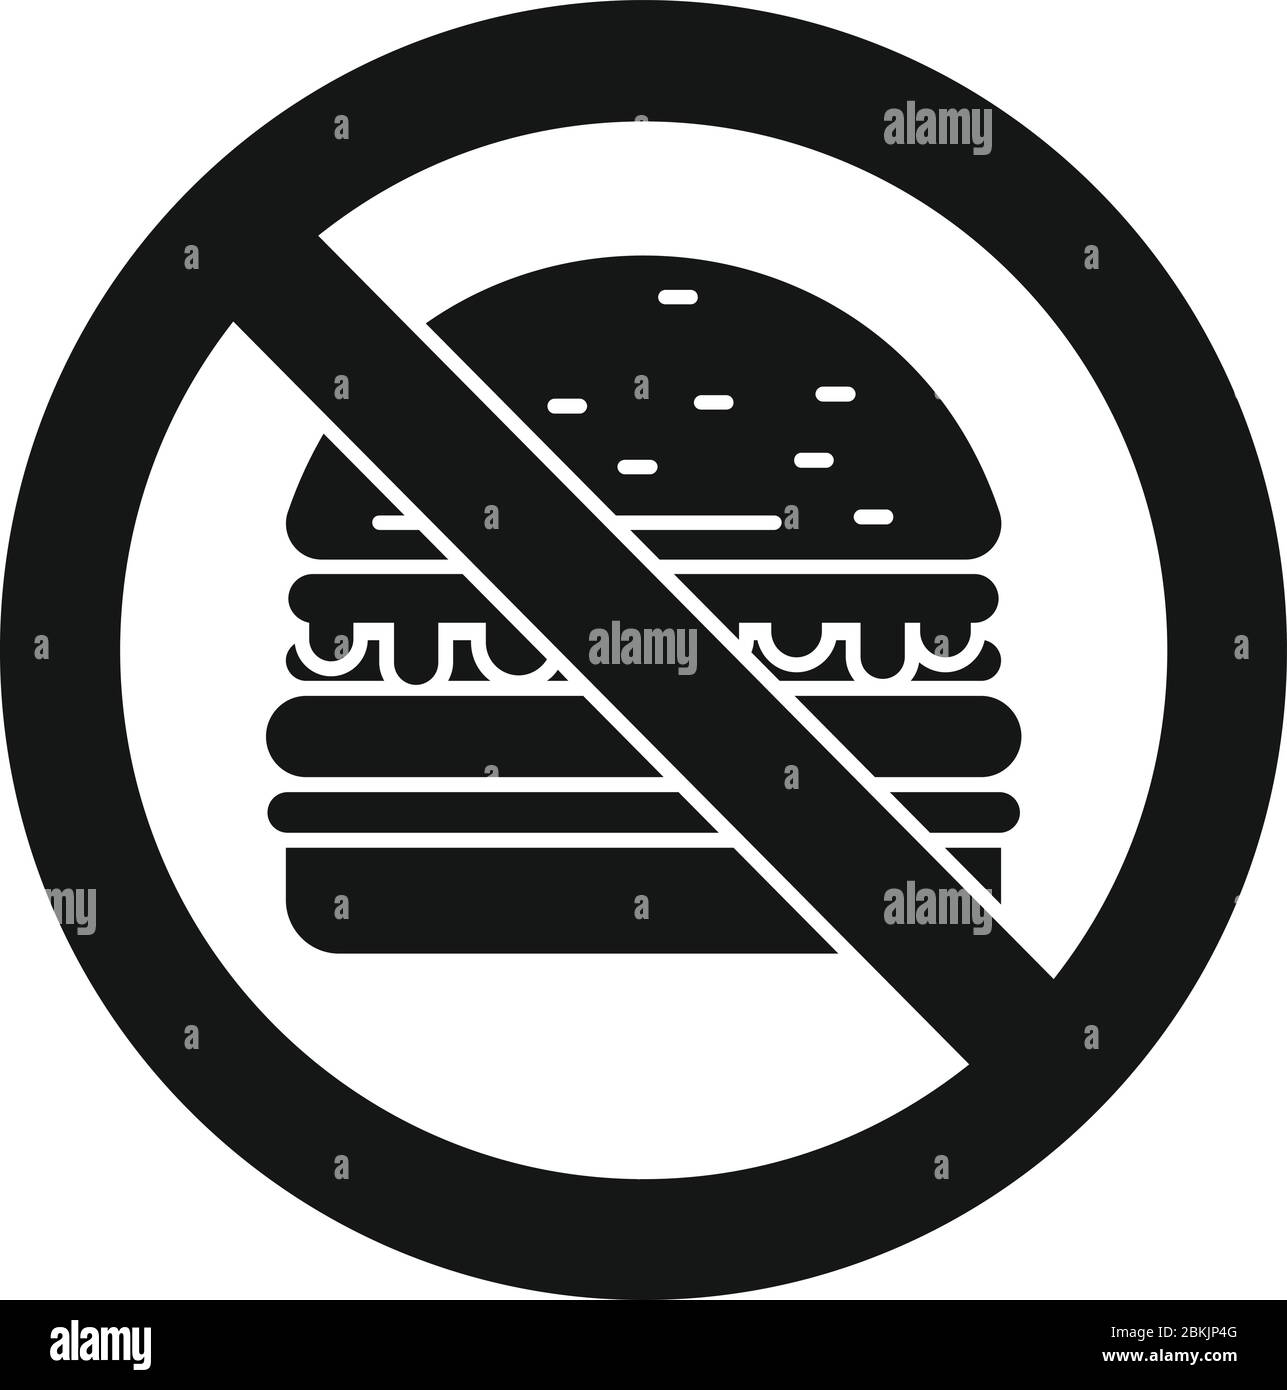 No burger eat icon. Simple illustration of no burger eat vector icon for web design isolated on white background Stock Vector